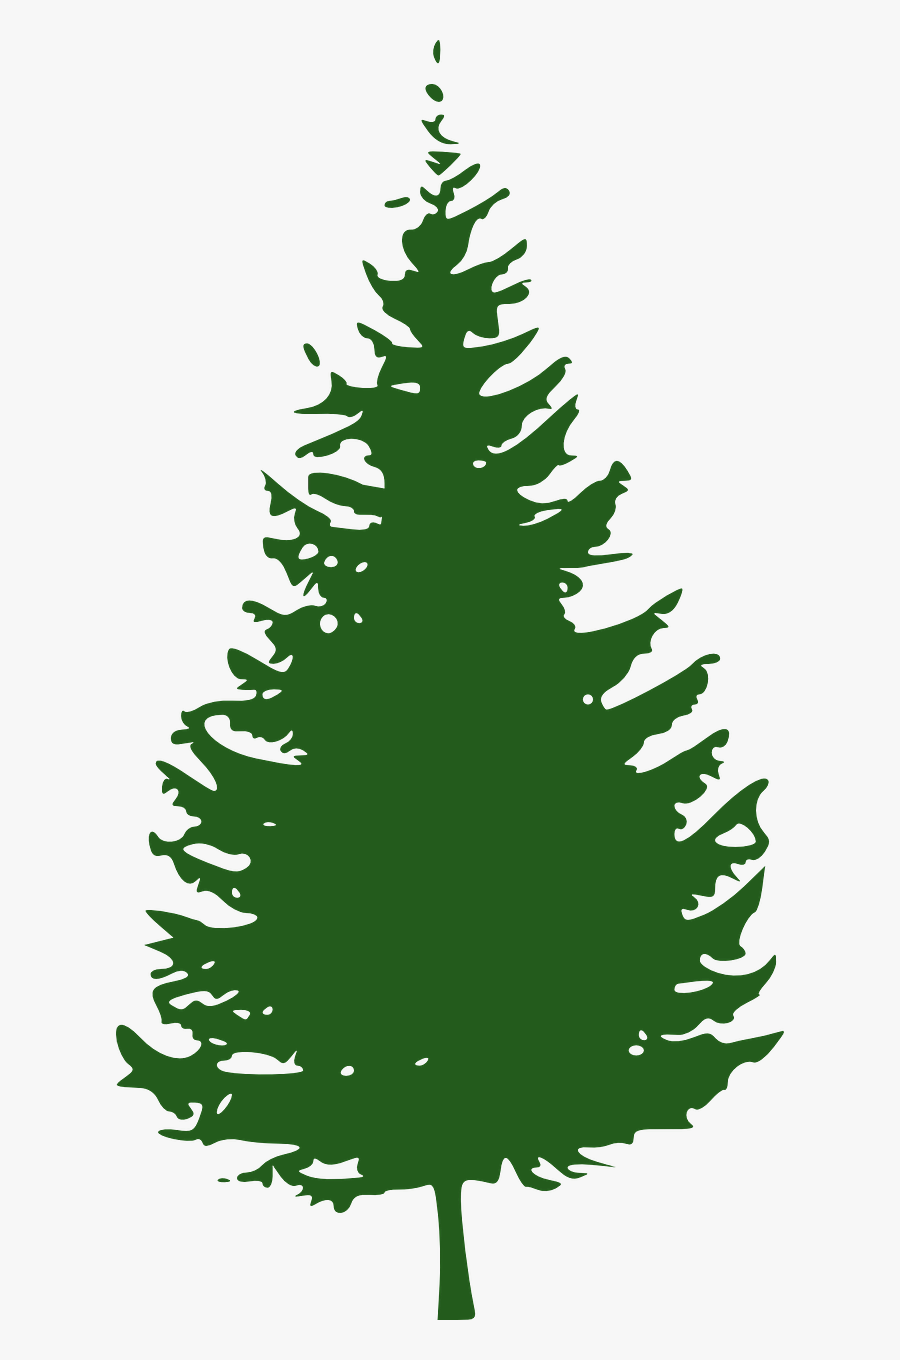 Transparent Forest Png - Pine Tree Clipart Free, Transparent Clipart